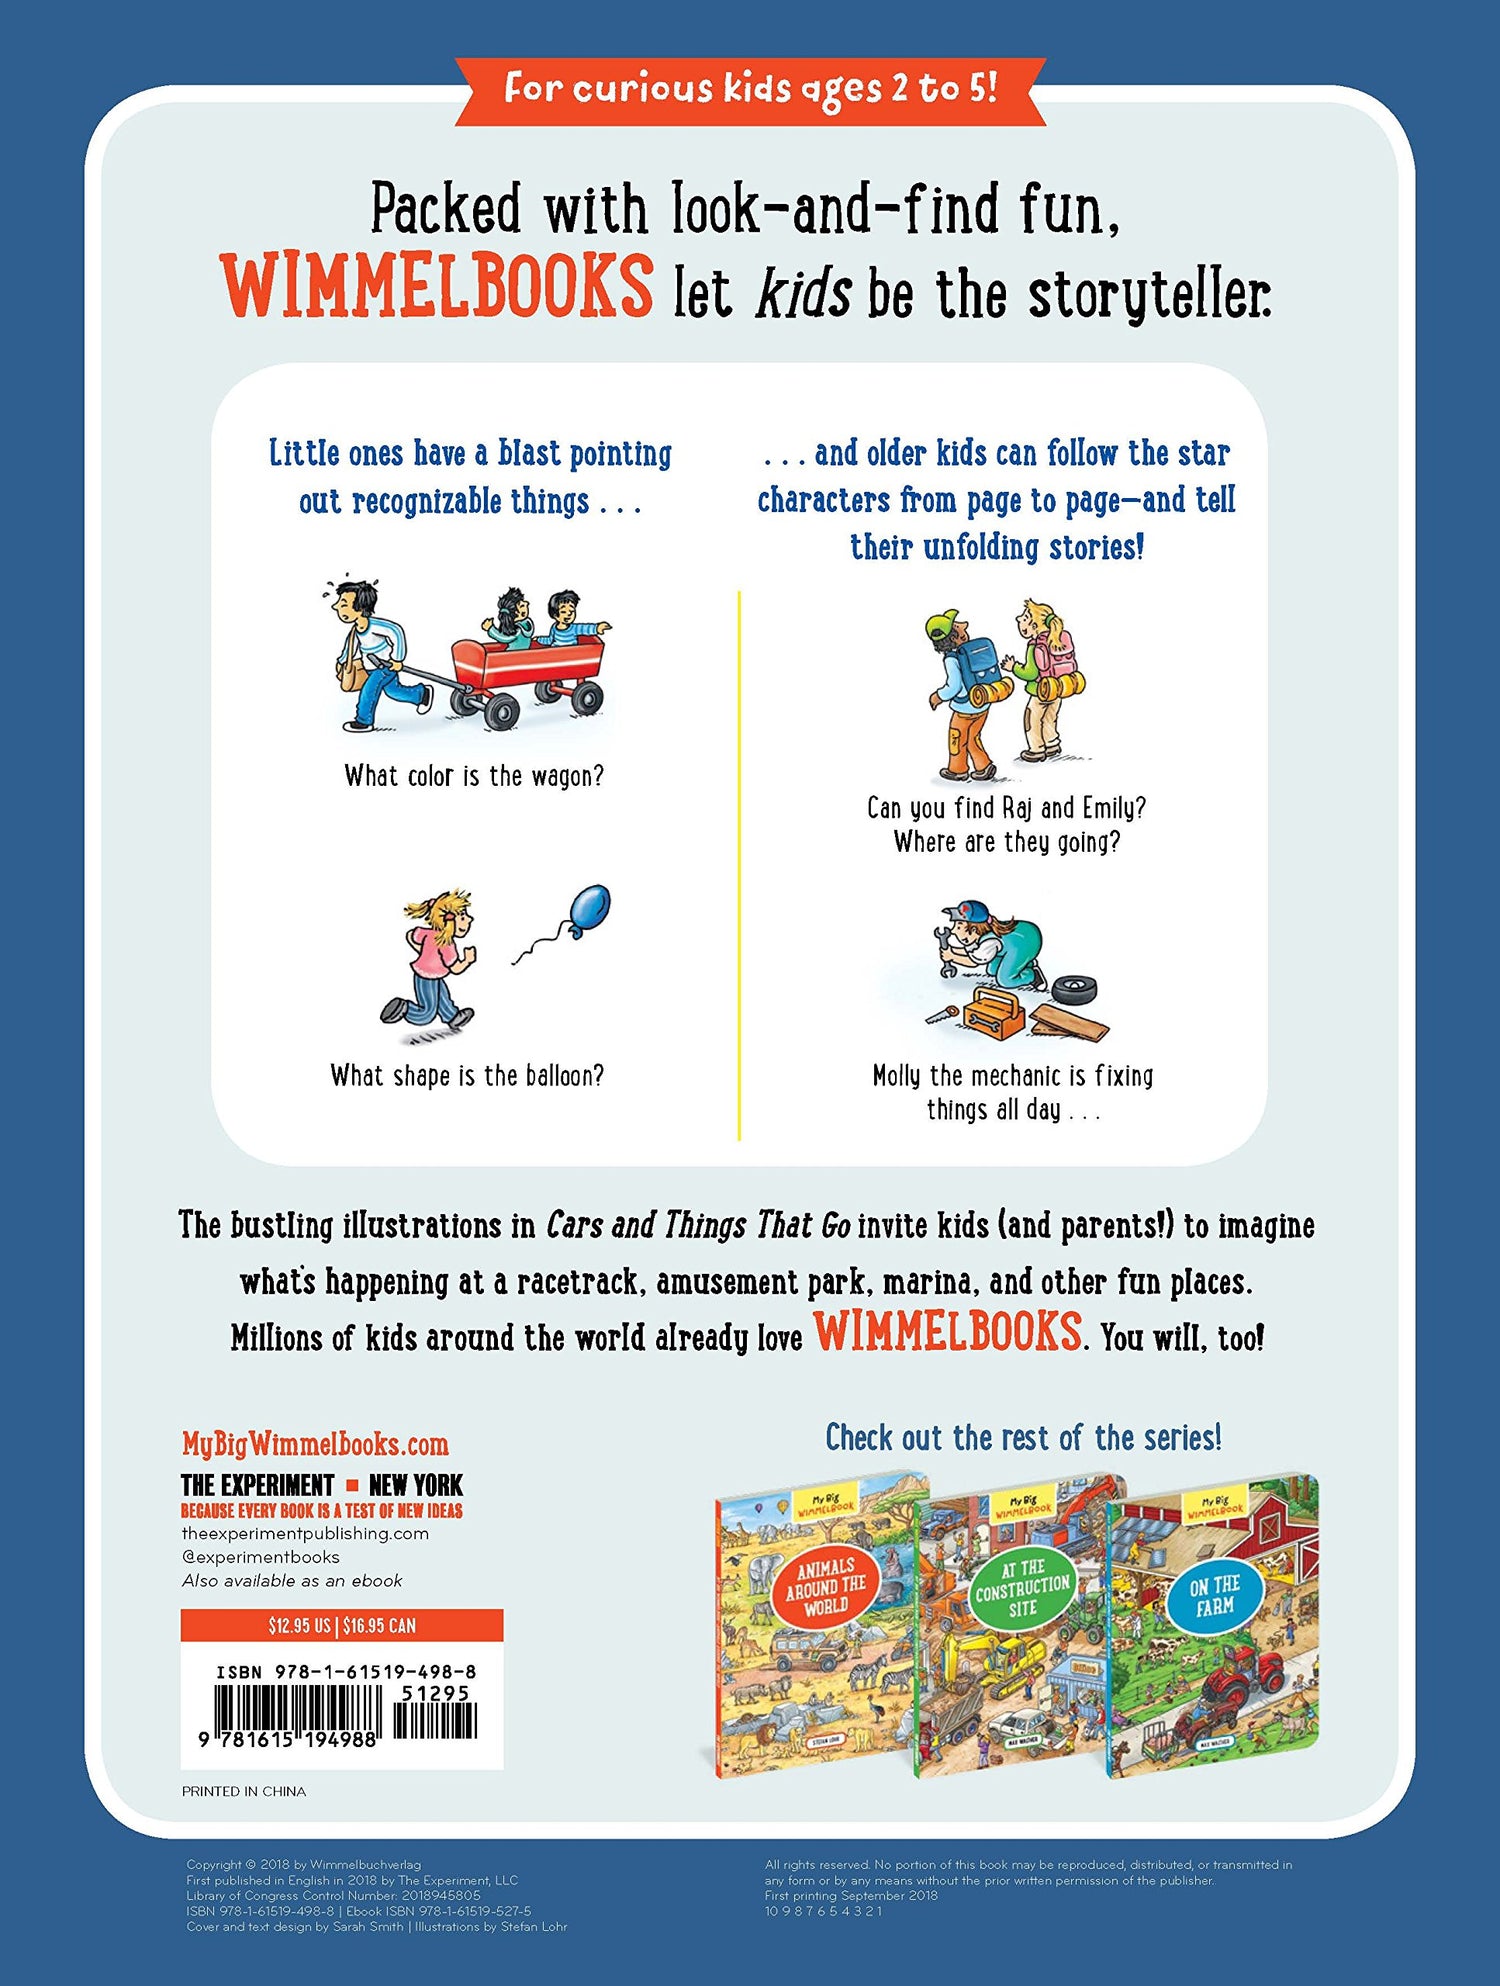 My Big Wimmelbook—Cars and Things that Go